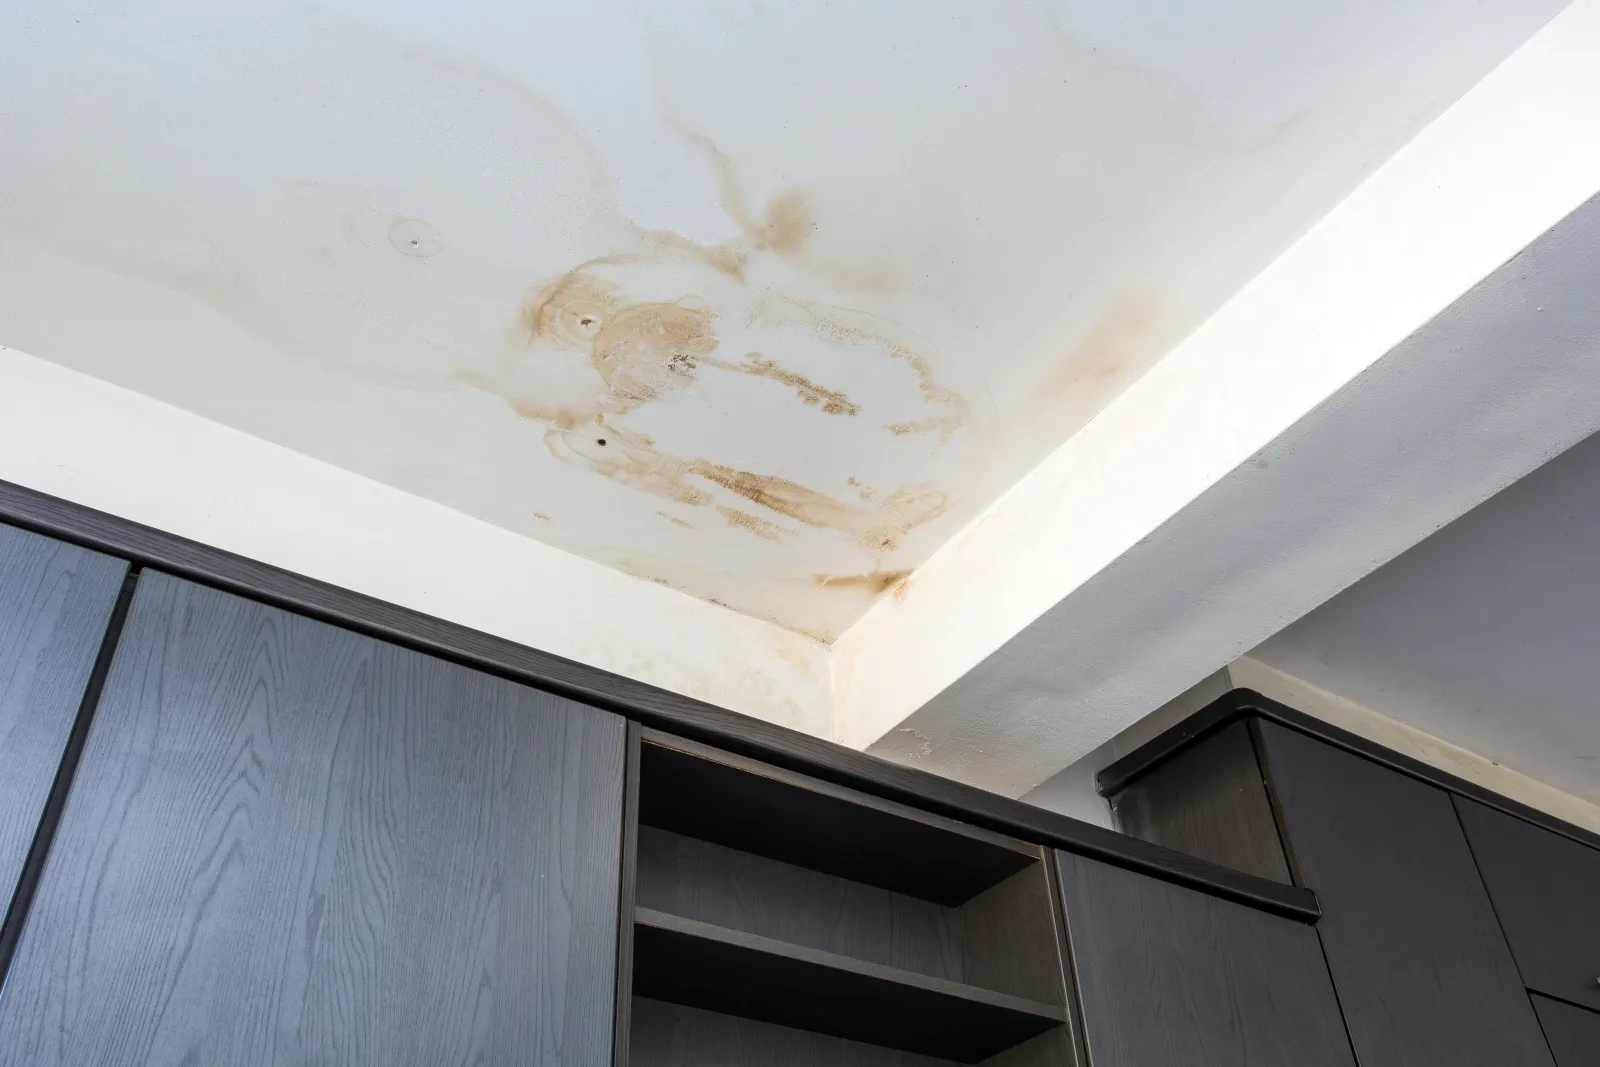 Ceiling Stain Mean A Leaking Roof